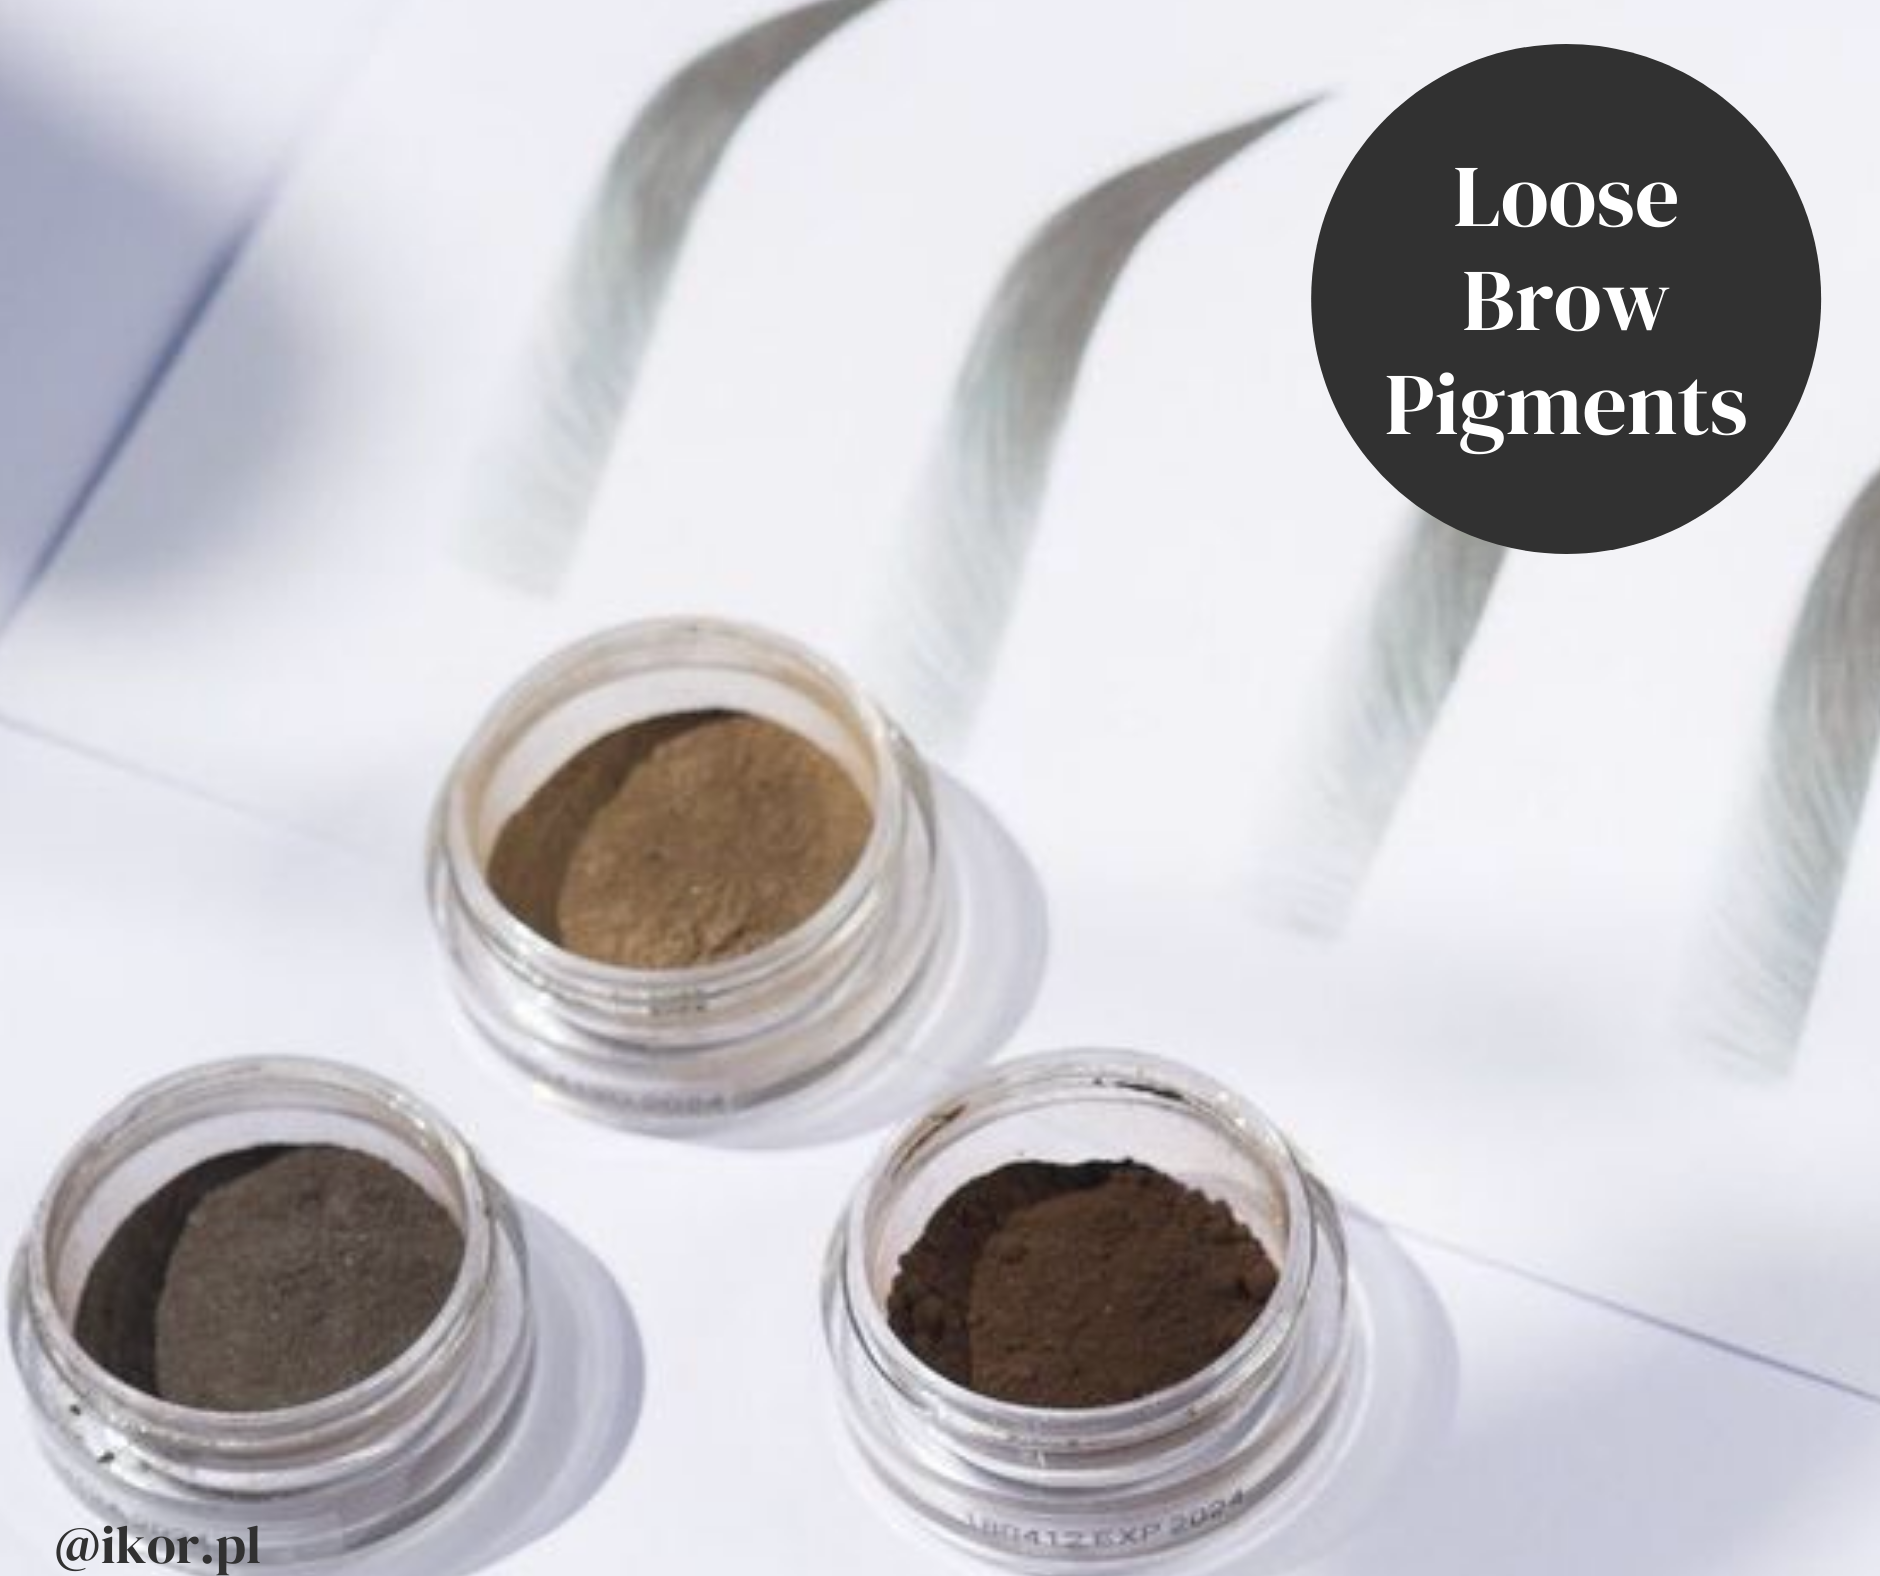 100% Pure Loose Mineral Brow Pigments